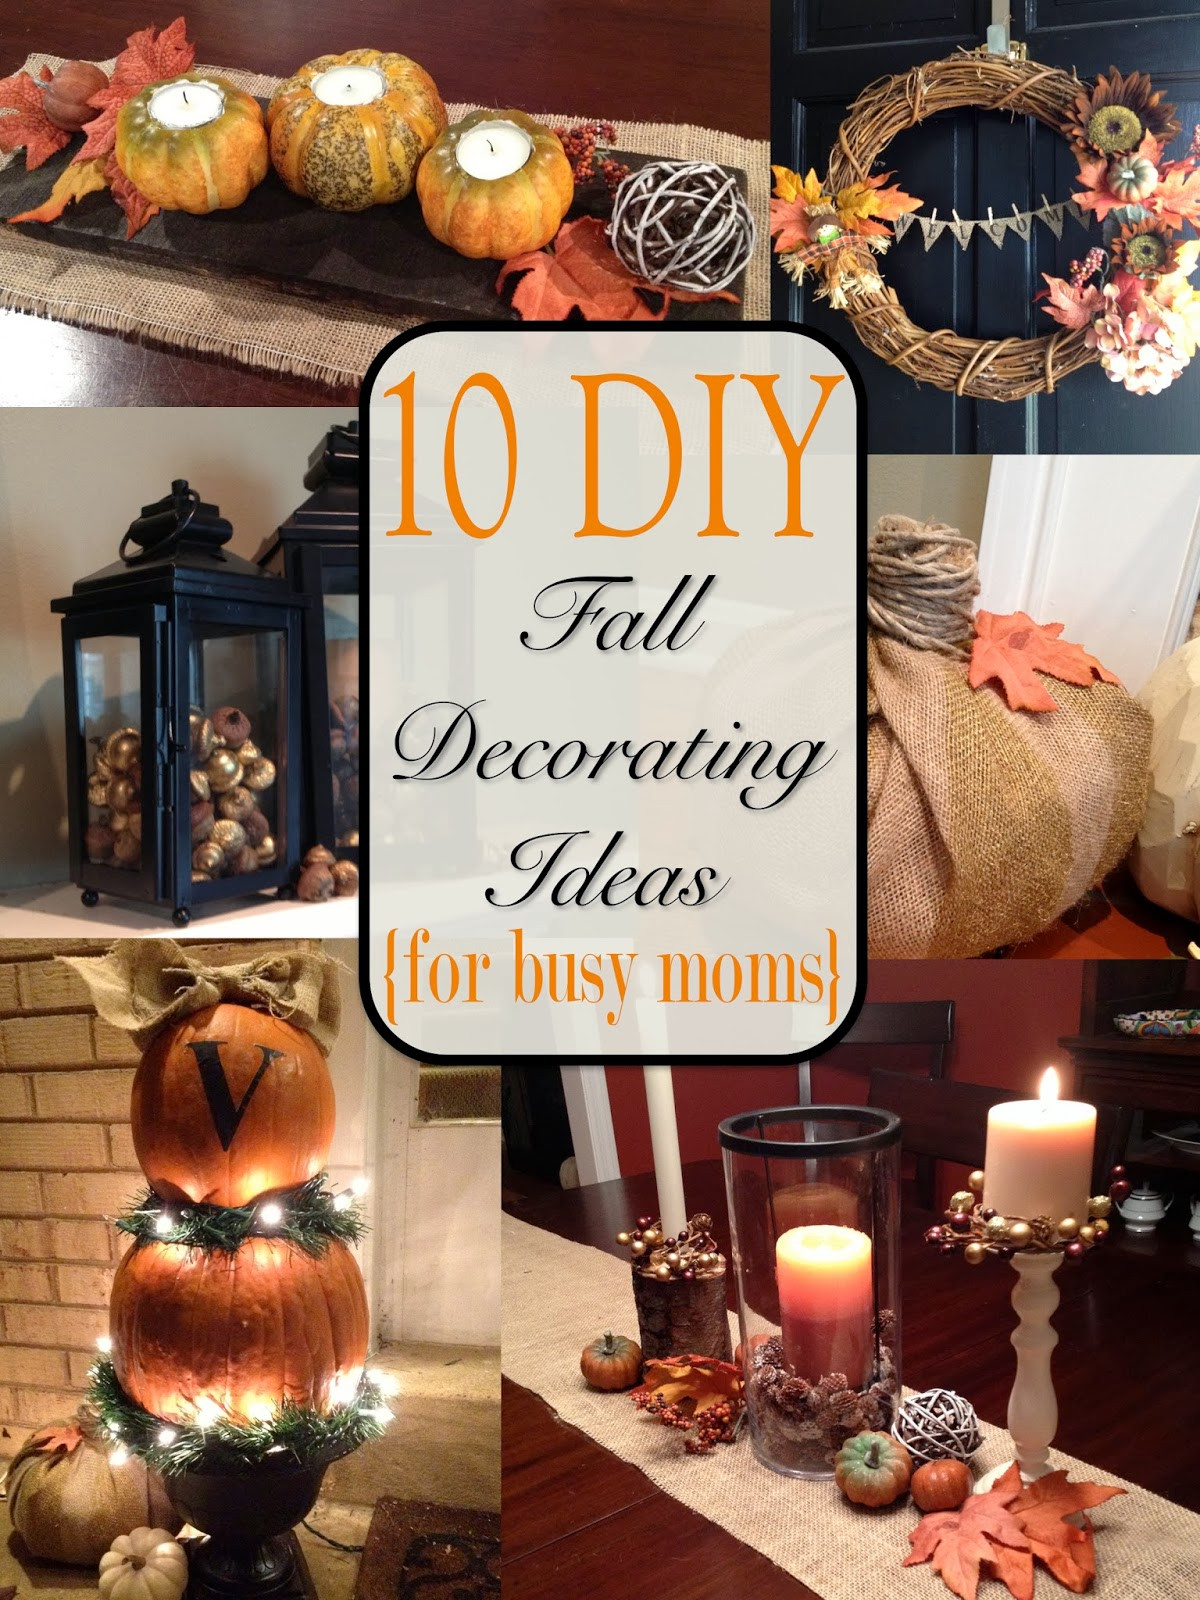 Fall Decorating Ideas DIY
 Two It Yourself Fall Home Tour 10 DIY Fall Decorating